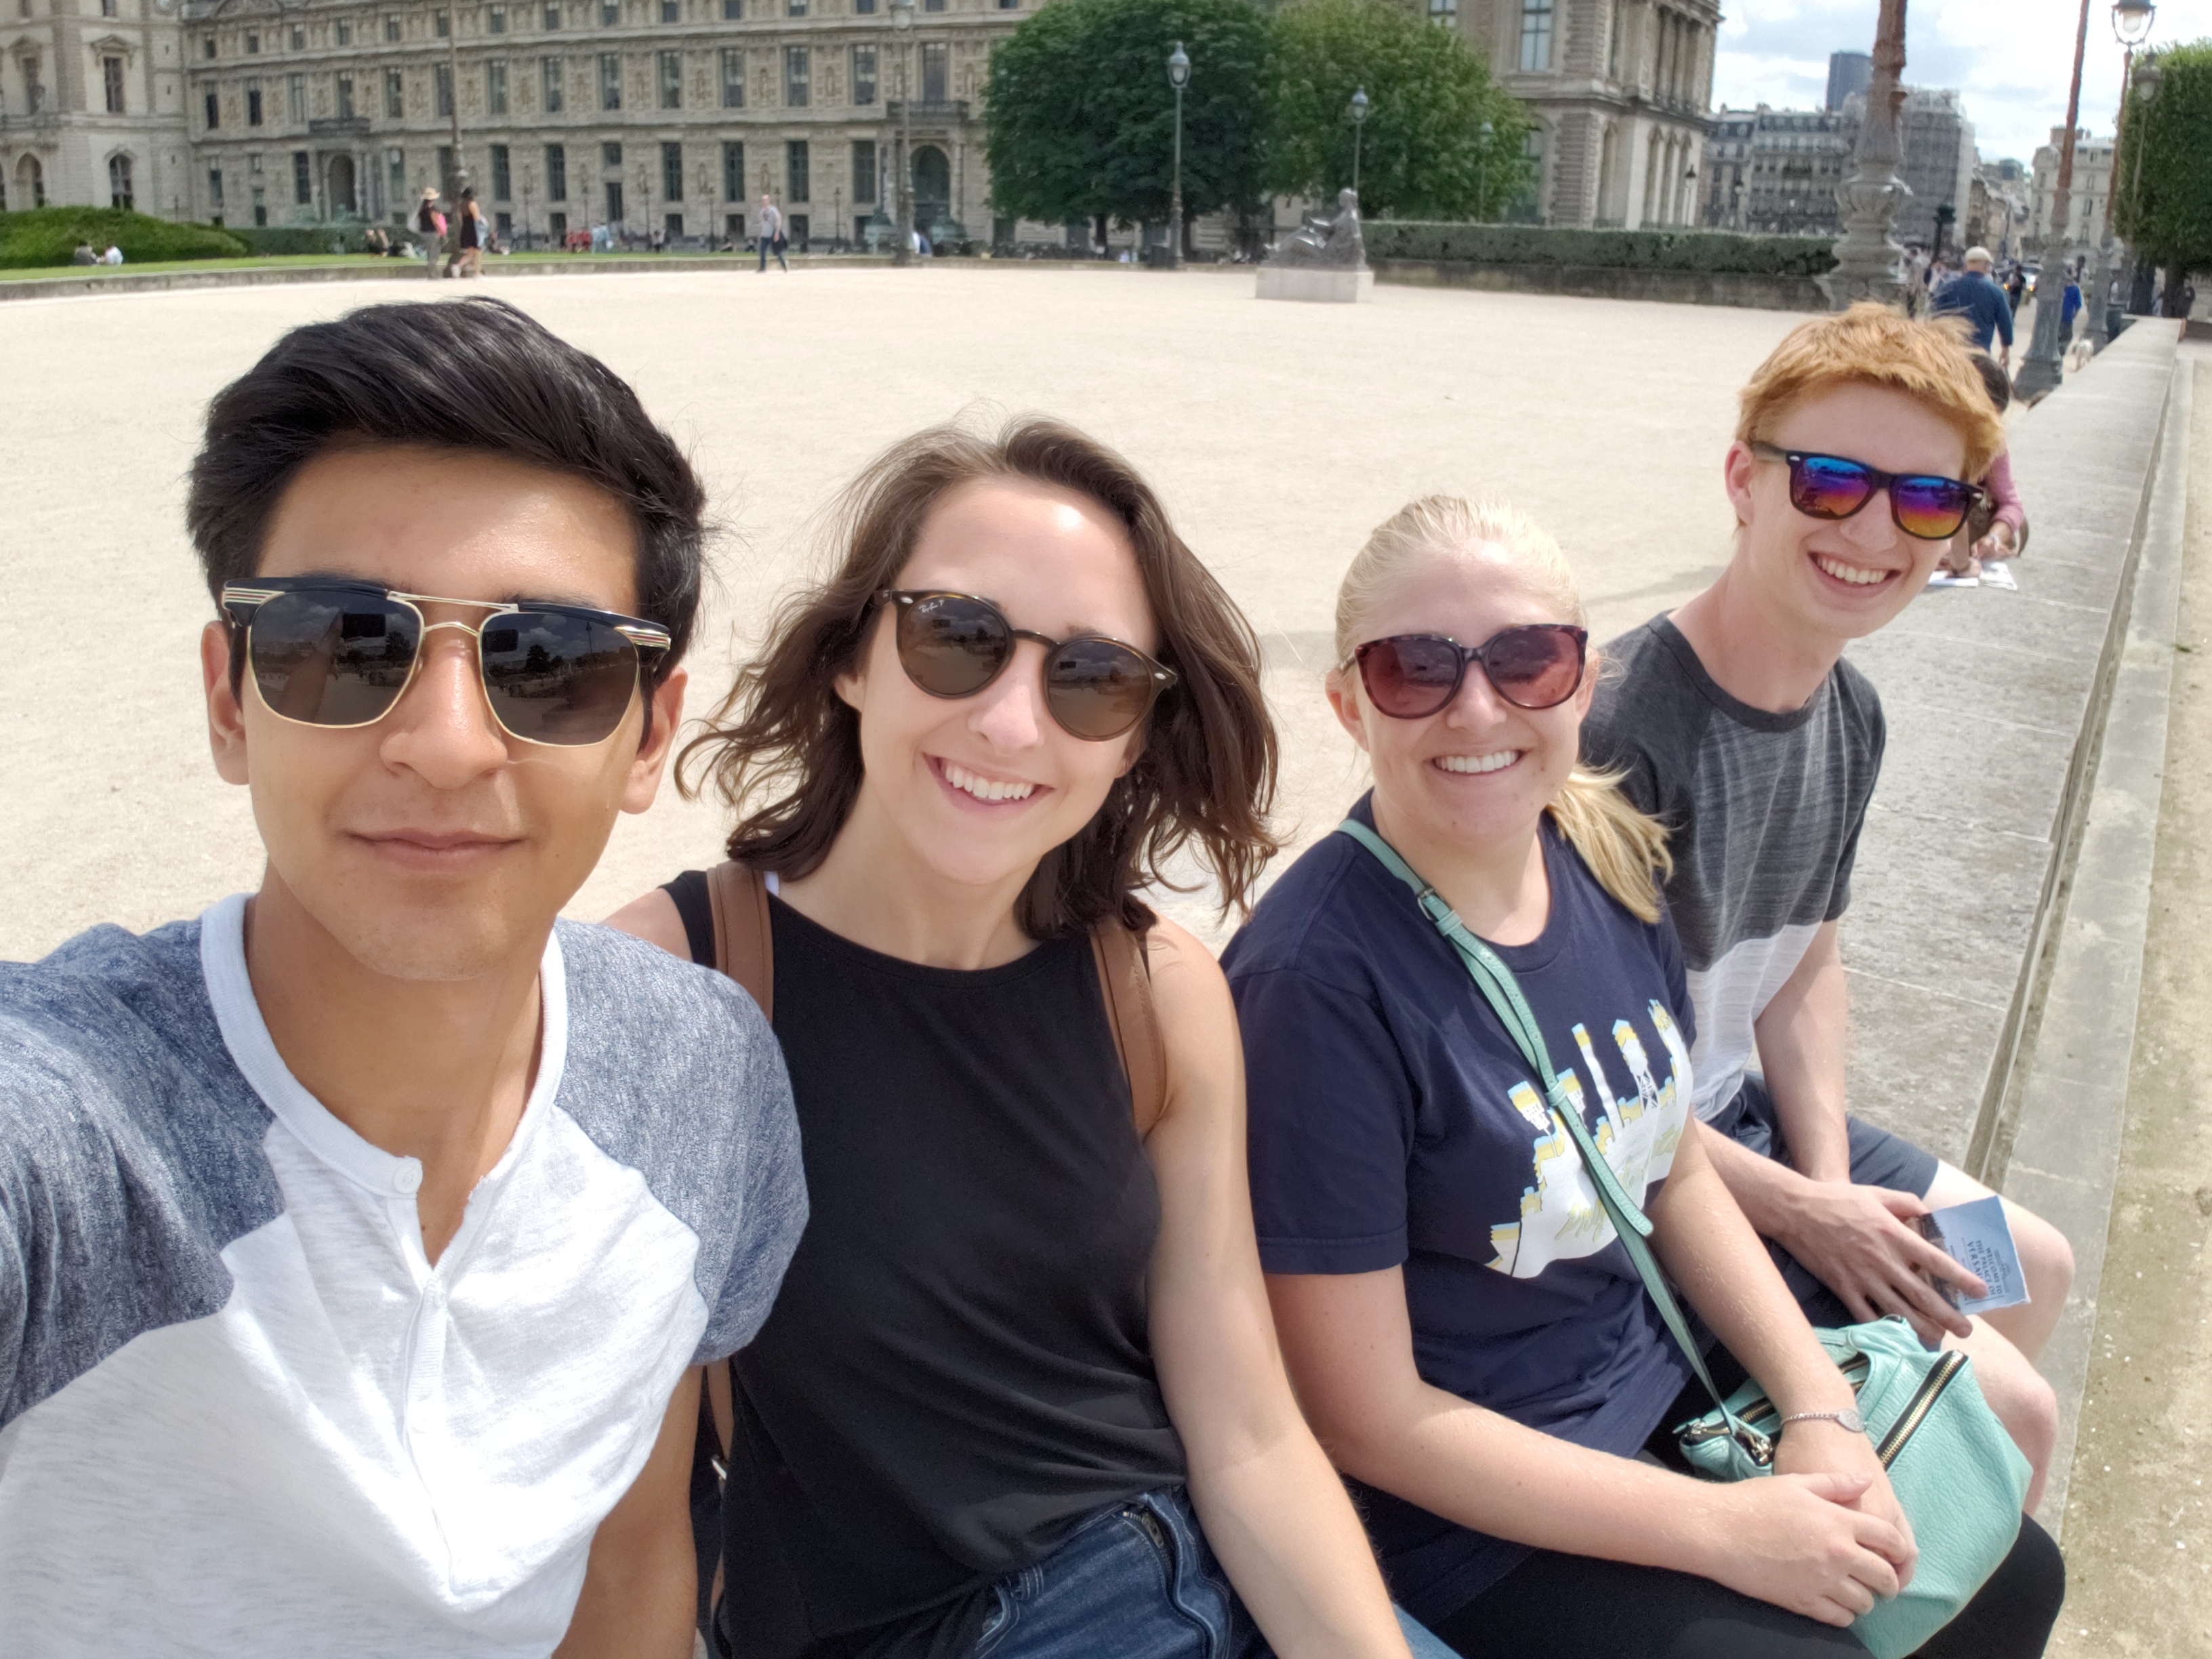 Me (Far Left), Kayley, Anna and Ben taking a break outside the Louvre in Paris.